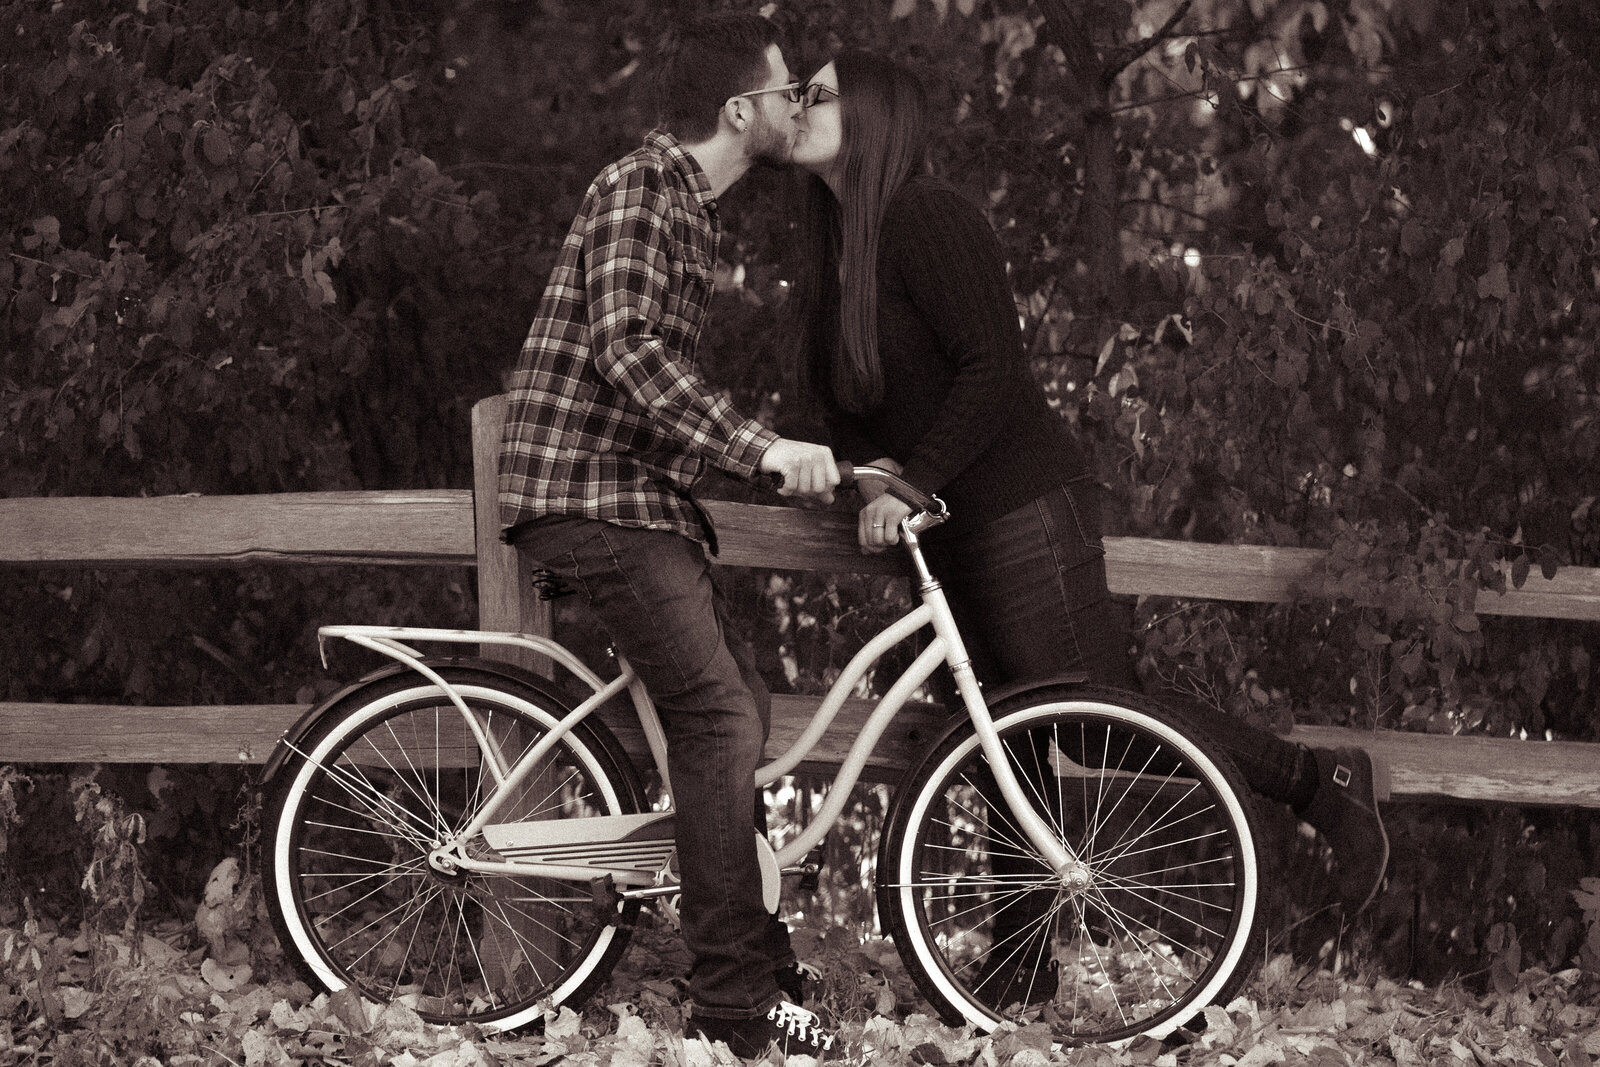 Couple kissing on a bike in the fall